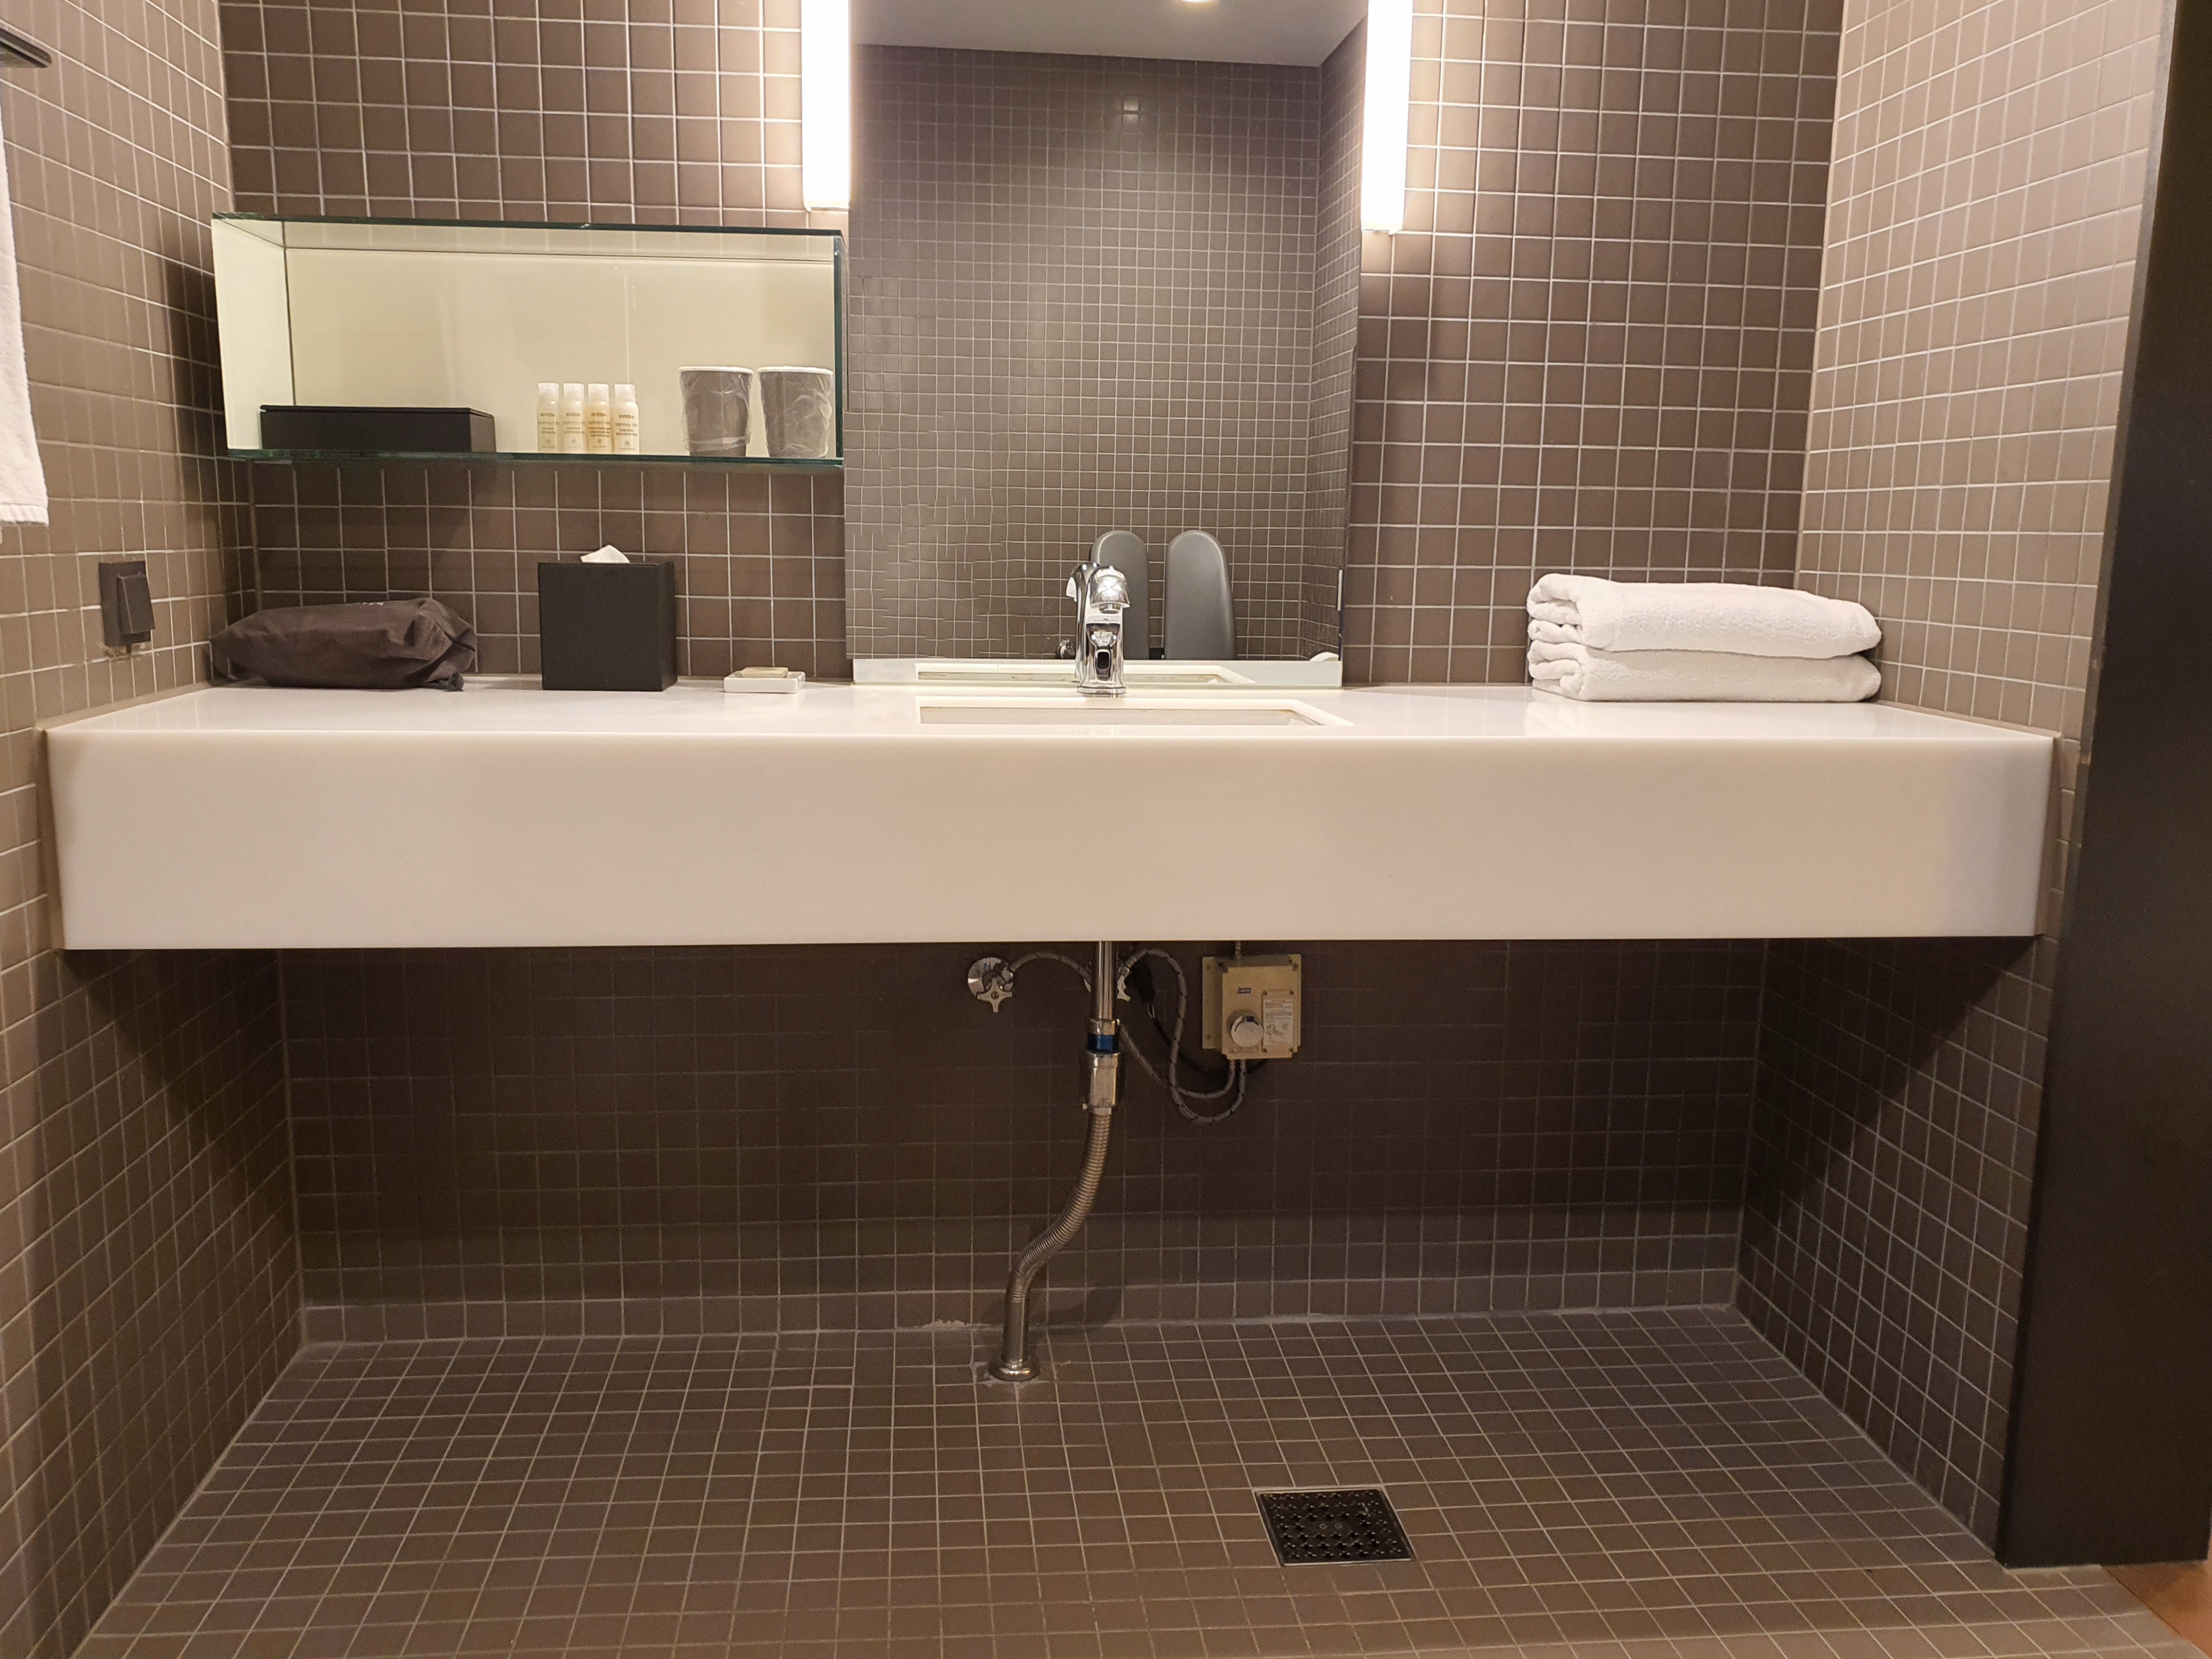 Accessible restroom in the guestroom0 : a wide wall-mounted bathroom sink with no cabinet underneath